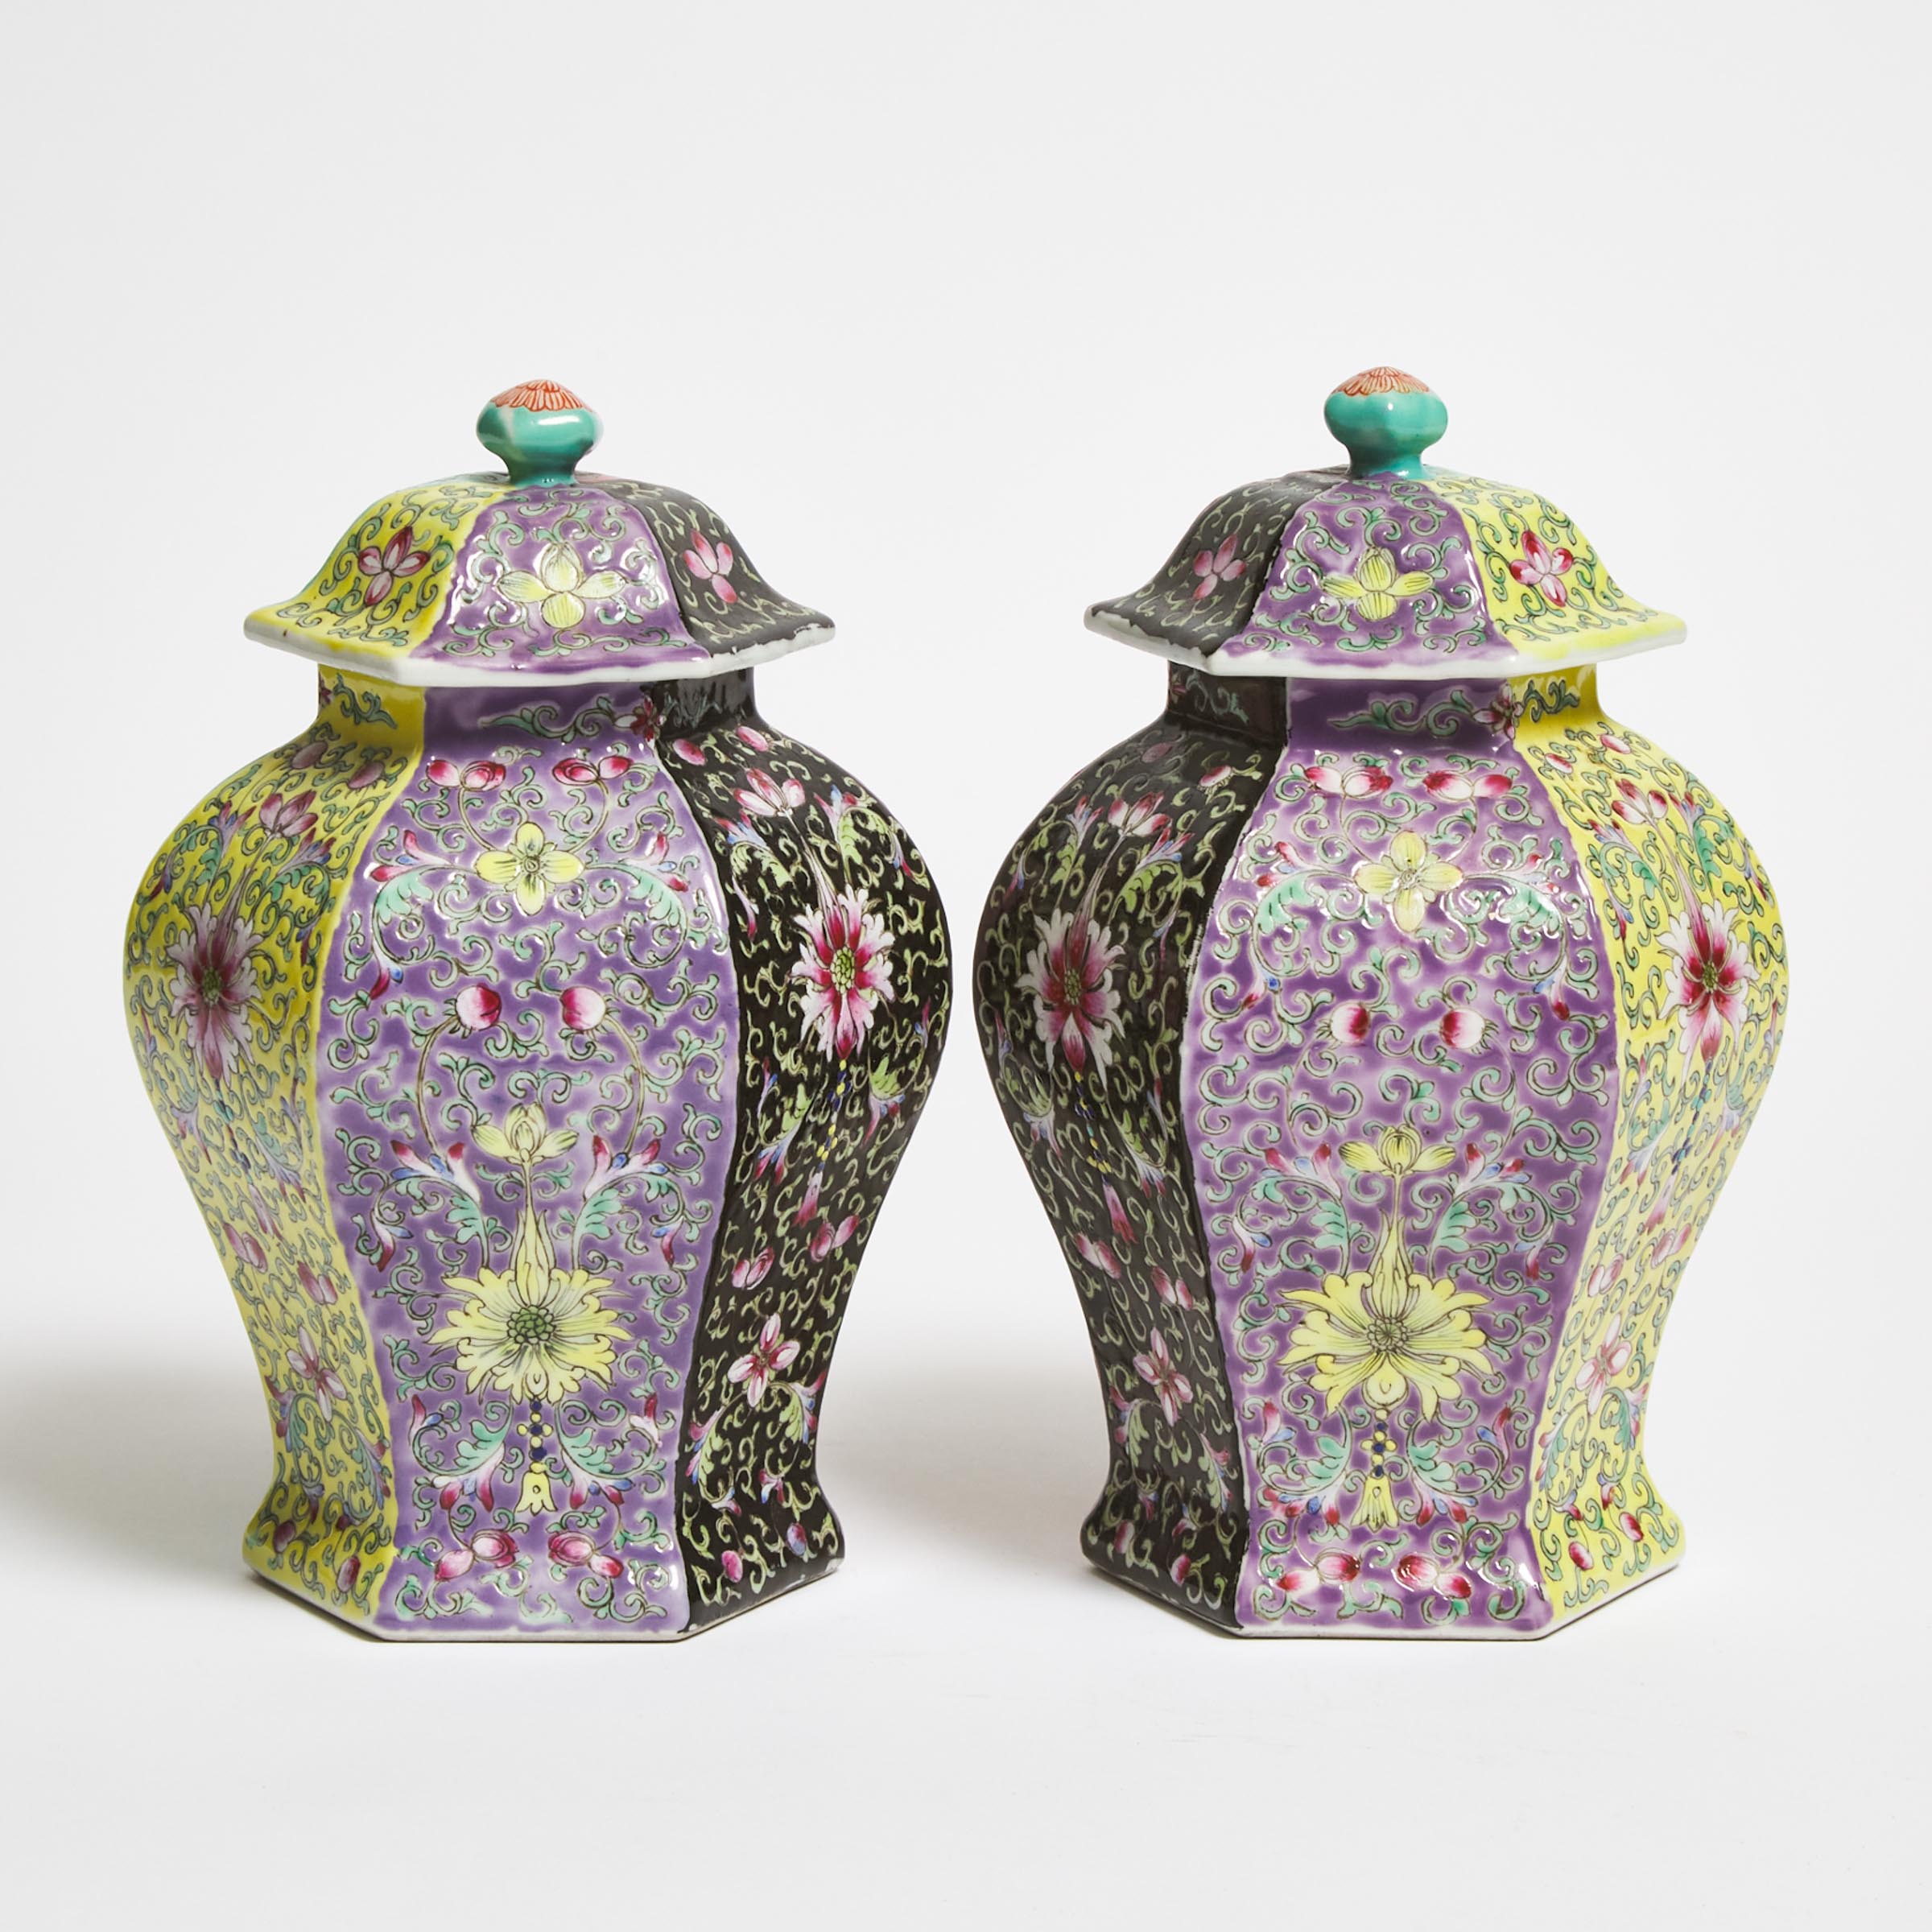 A Pair of Enameled Hexagonal Vases and Covers, Republican Period (1912-1949)